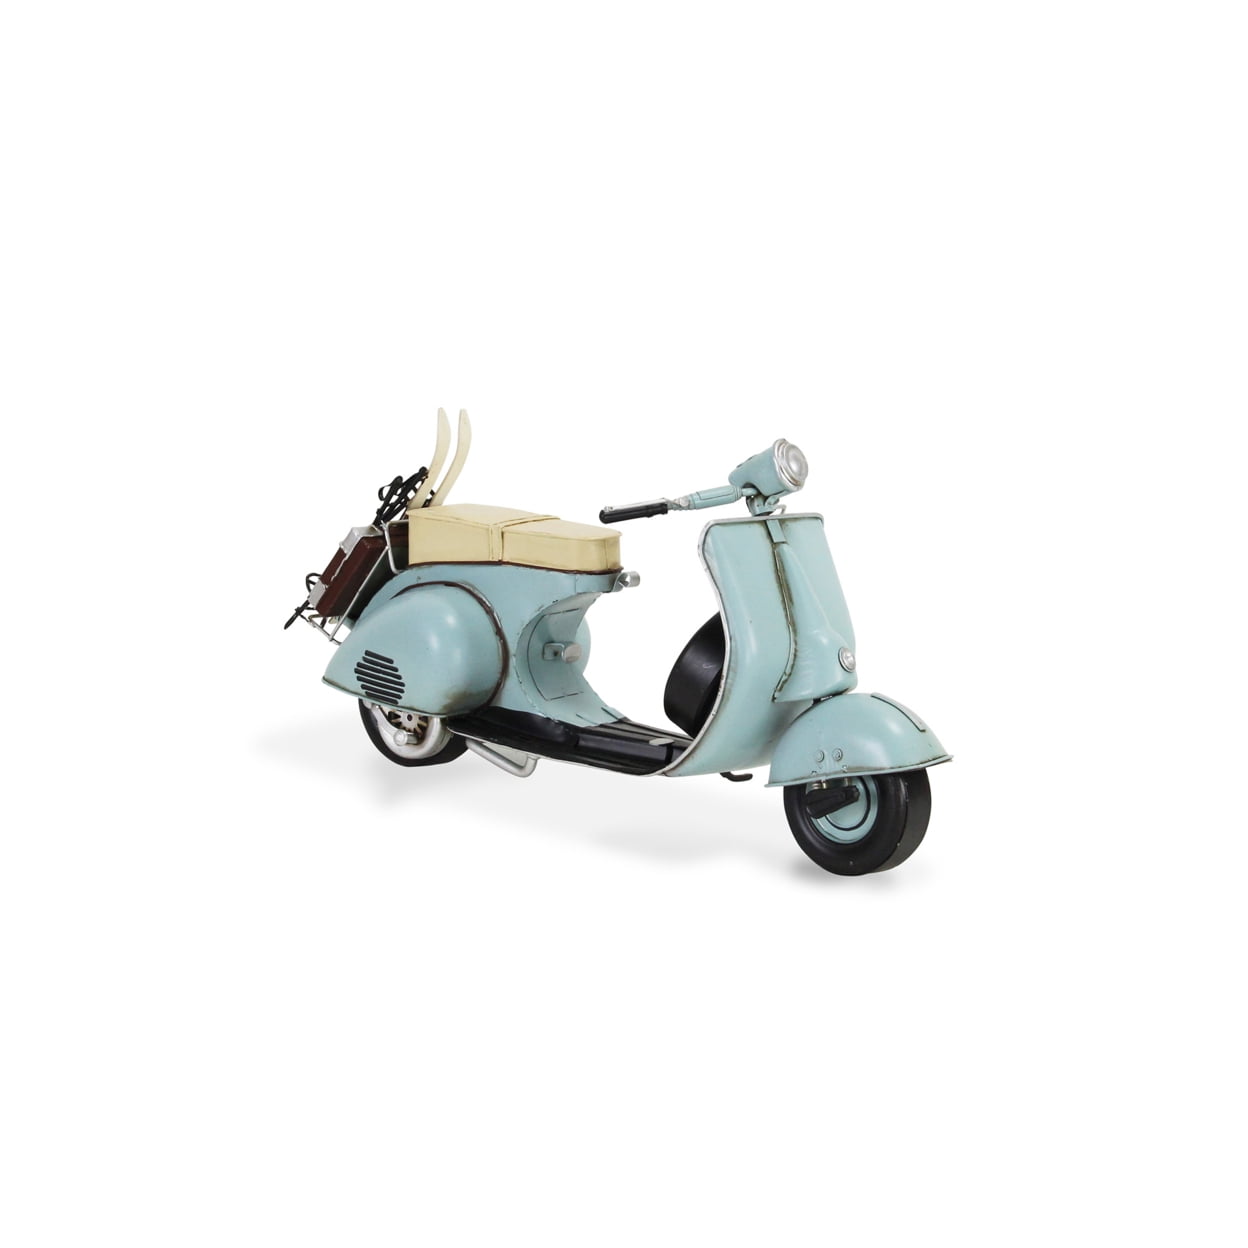 Ja-0290 Scooter Motor Cycle - Blue